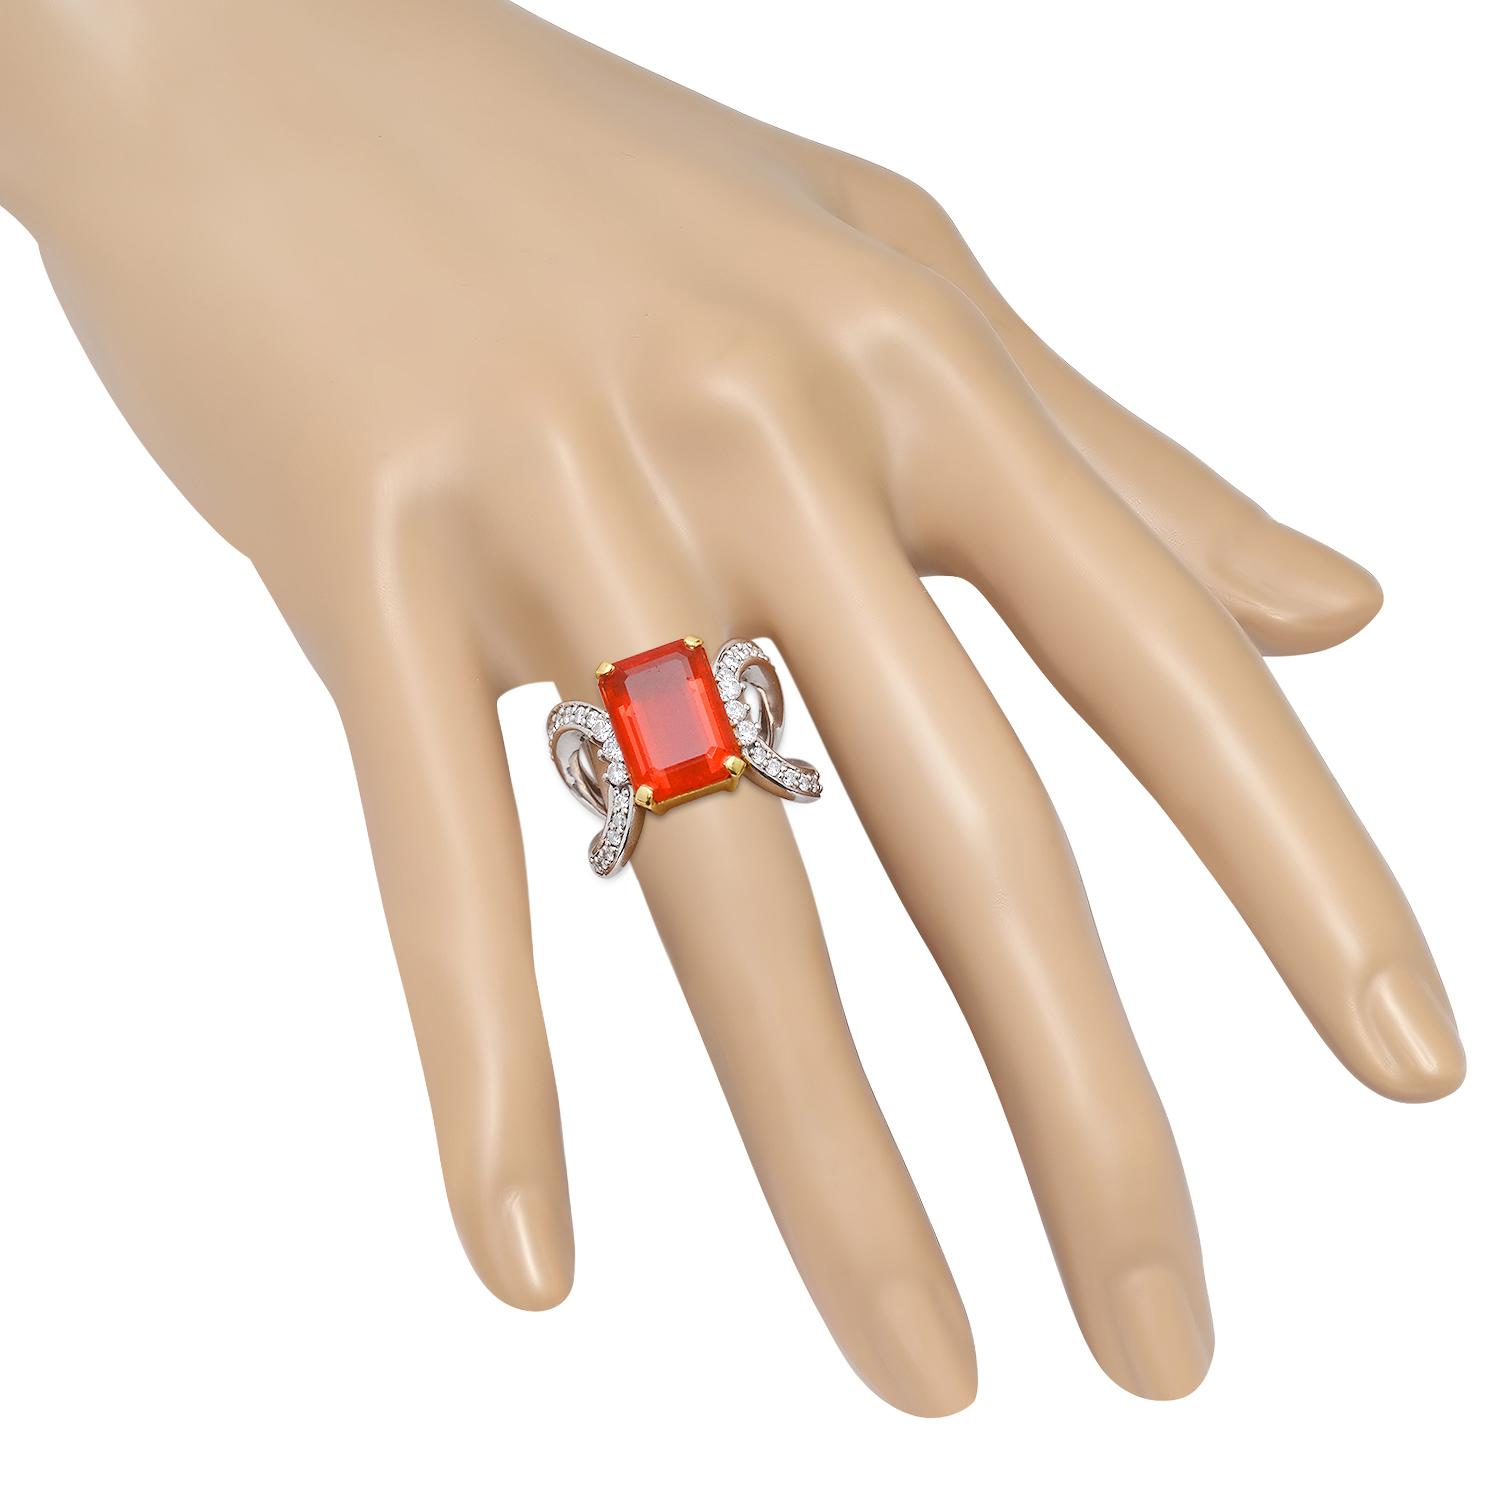 Platinum Setting with 4.18ct Fire Opal and 0.54ct Diamond Ladies Ring